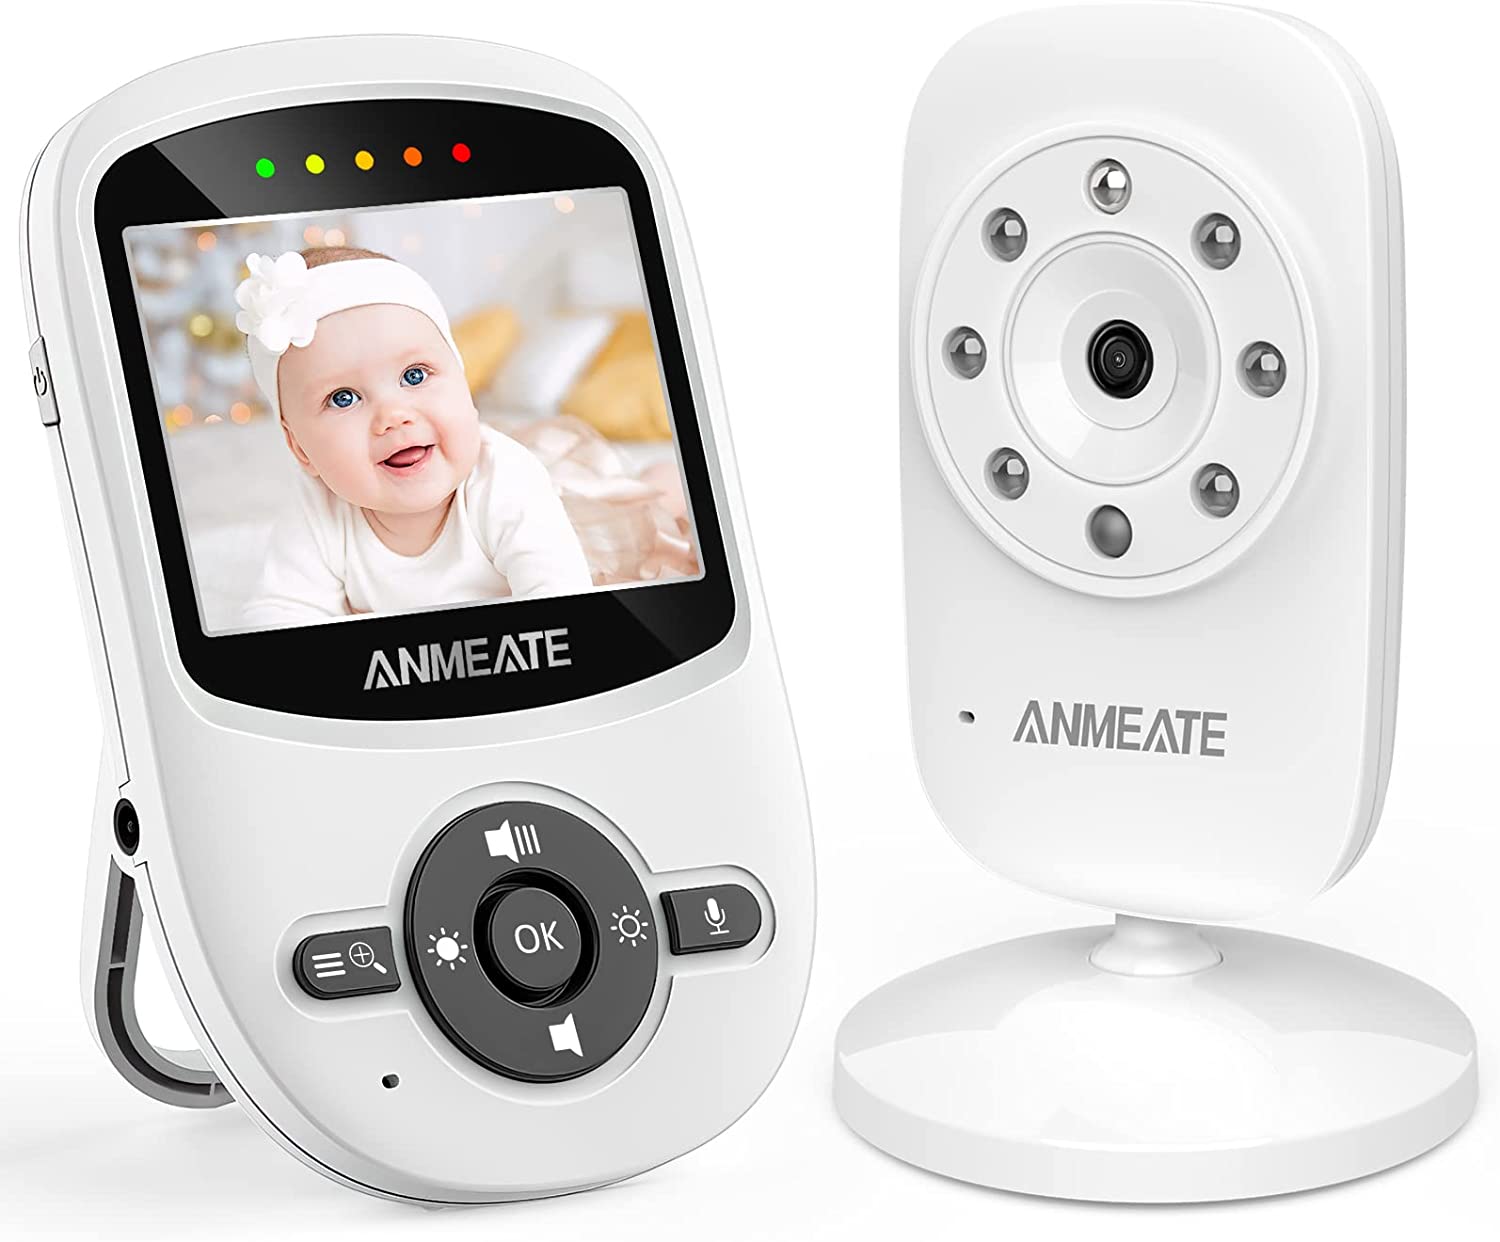 ANMEATE Video Baby Monitor with Digital Camera, Digital 2.4Ghz Wireless Video Monitor with Temperature Monitor, 960ft Transmission Range, 2-Way Talk, Night Vision, High Capacity Battery (2.4inch) SM - image 1 of 7